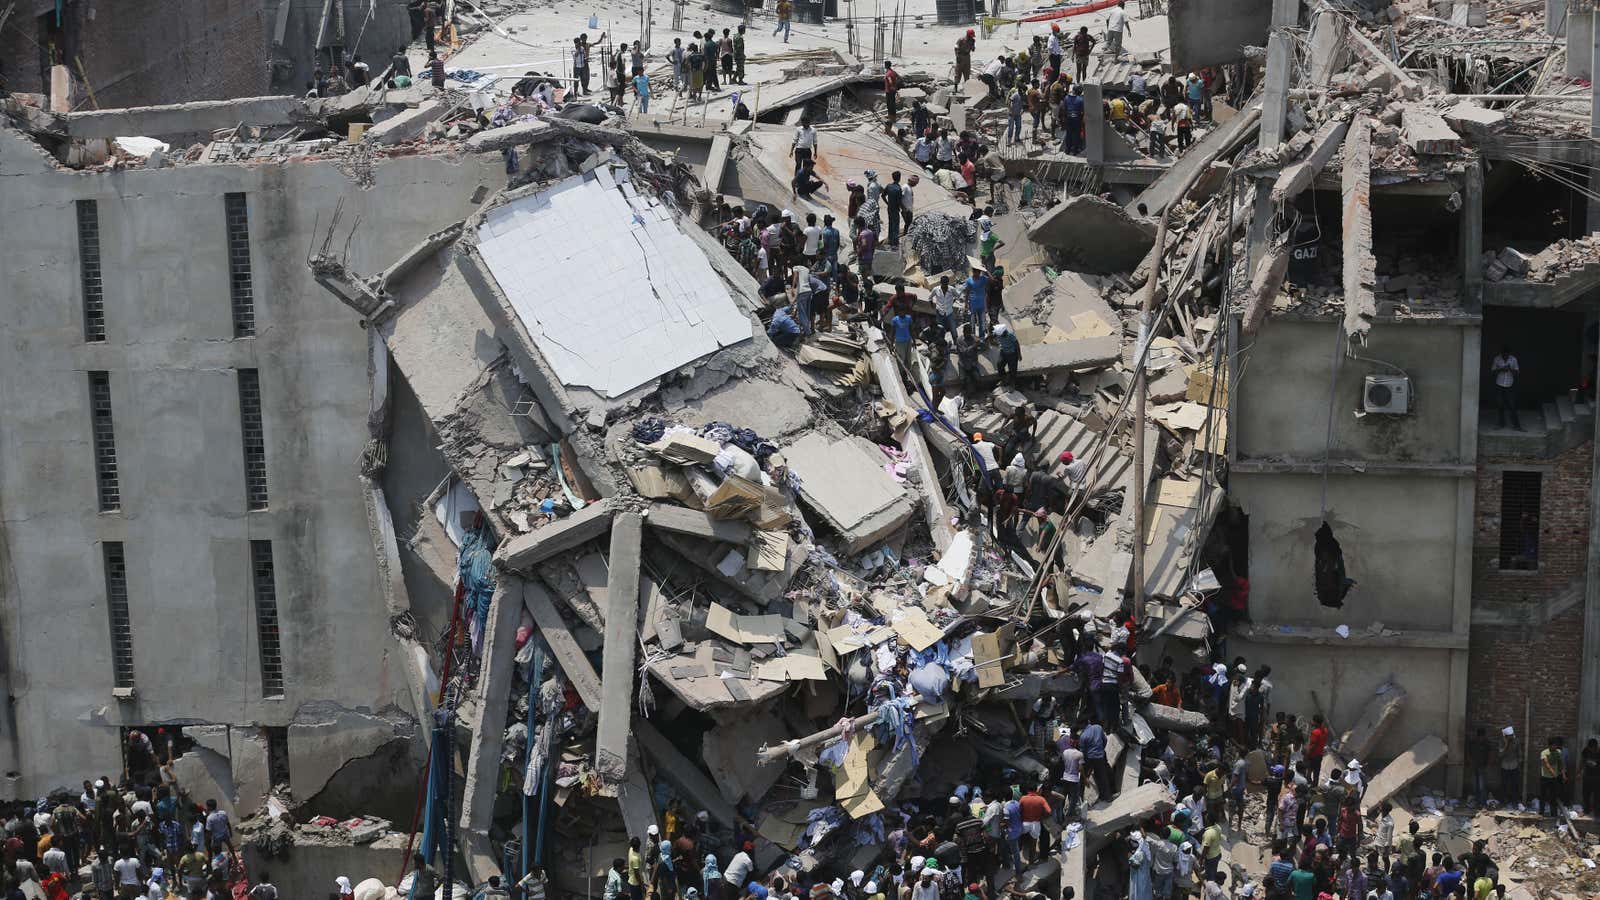 The eight-story Rana Plaza building that collapsed, killing 1,134 people.